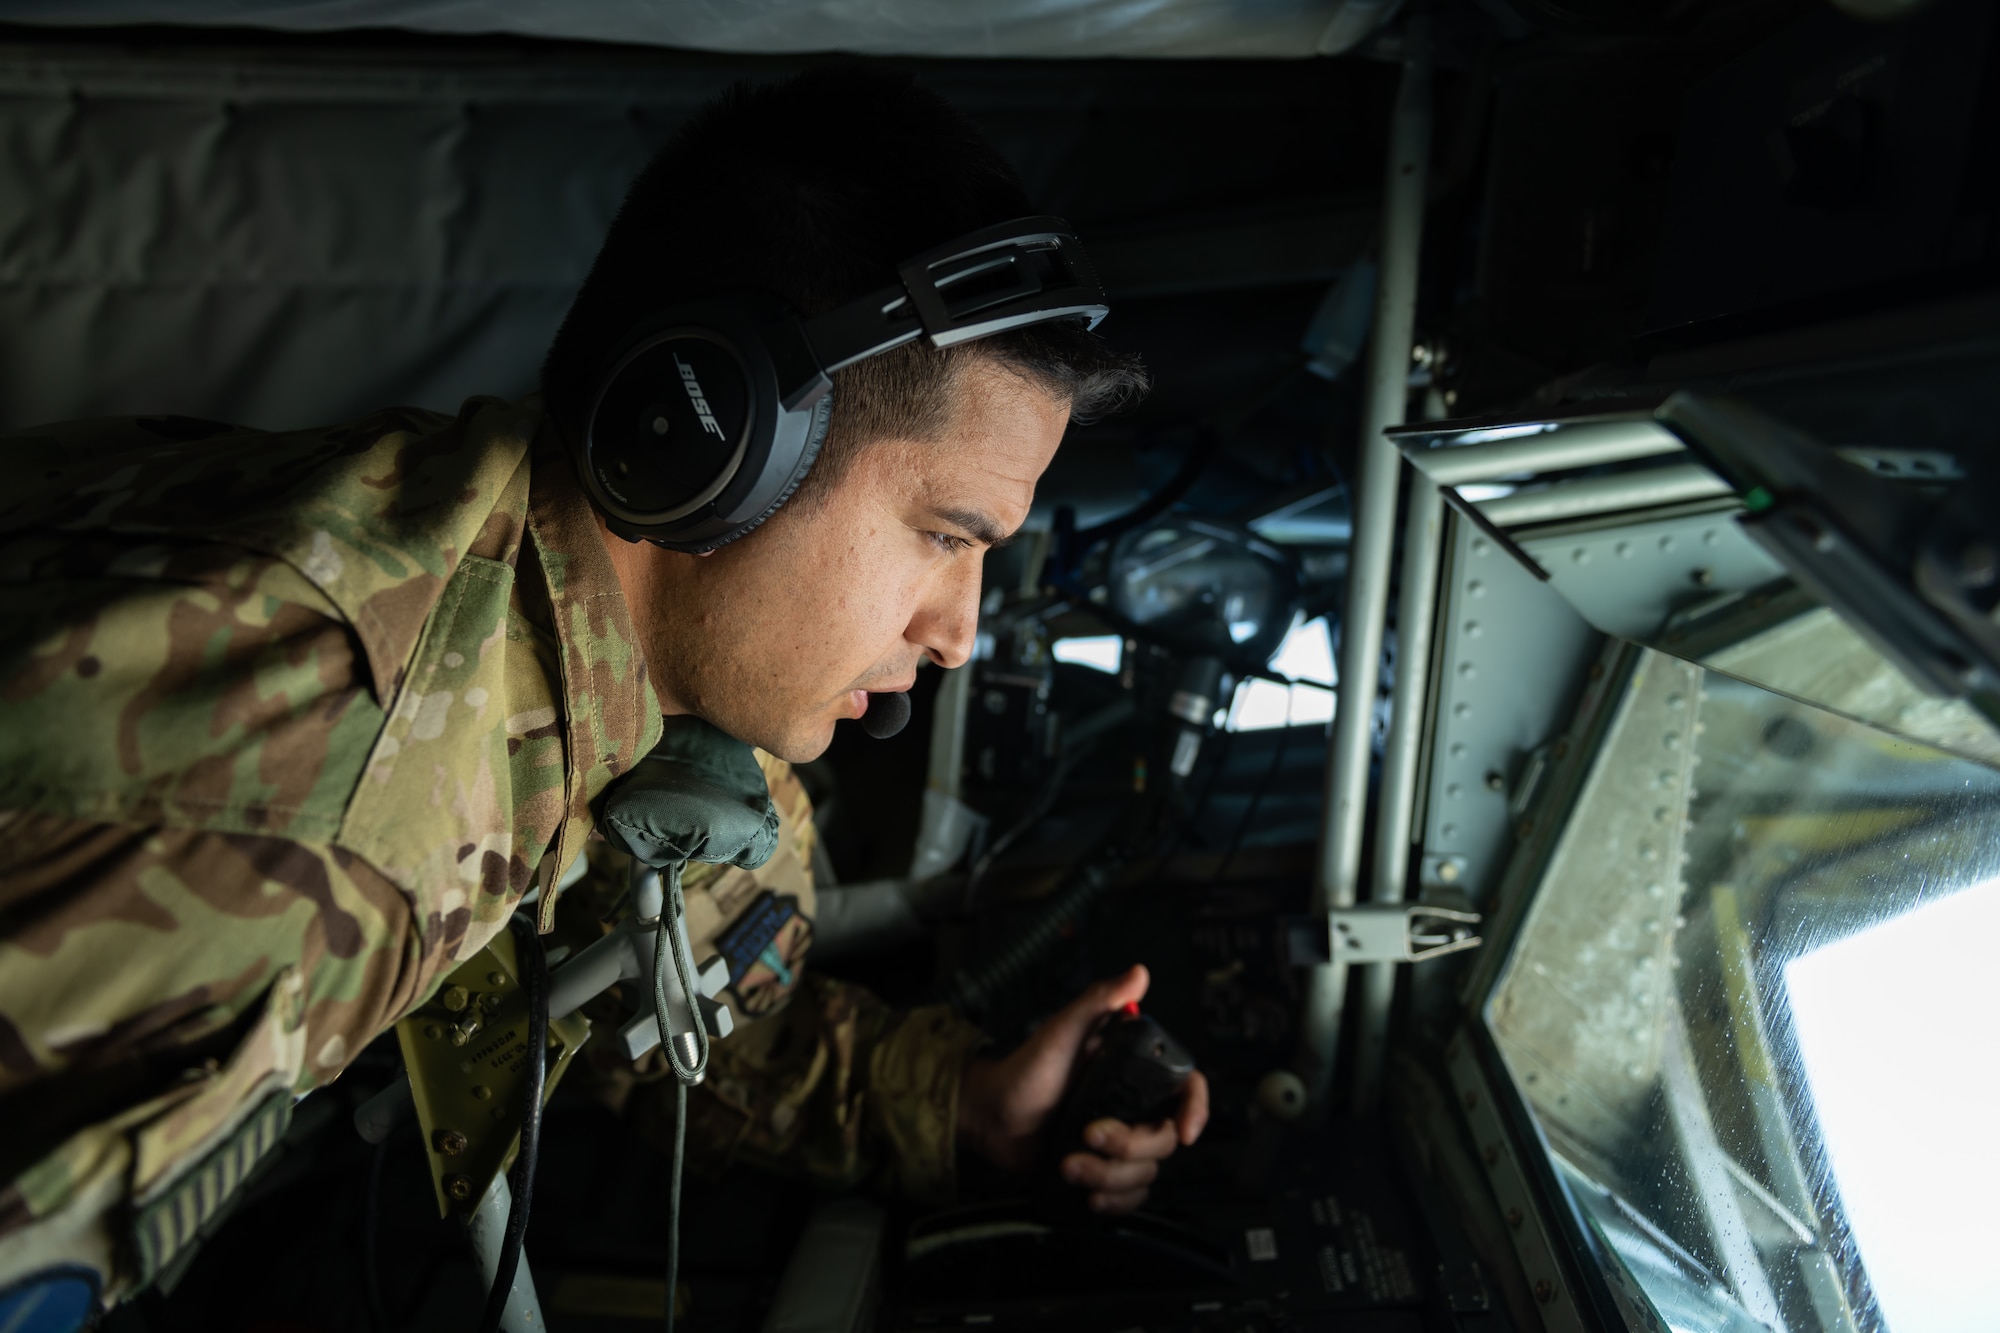 U.S. Air Force Technical Sergeant Chance Italiano, 18th Air Refueling Squadron boom operator, works the controls in his boom pod during a routine training exercise off the coast of Japan, May 8, 2019. The 909th ARS helps ensure a free-and-open Indo-Pacific by providing air refueling to U.S., allies and partners within the area of responsibility. (U.S. Air Force photo by Airman 1st Class Matthew Seefeldt)